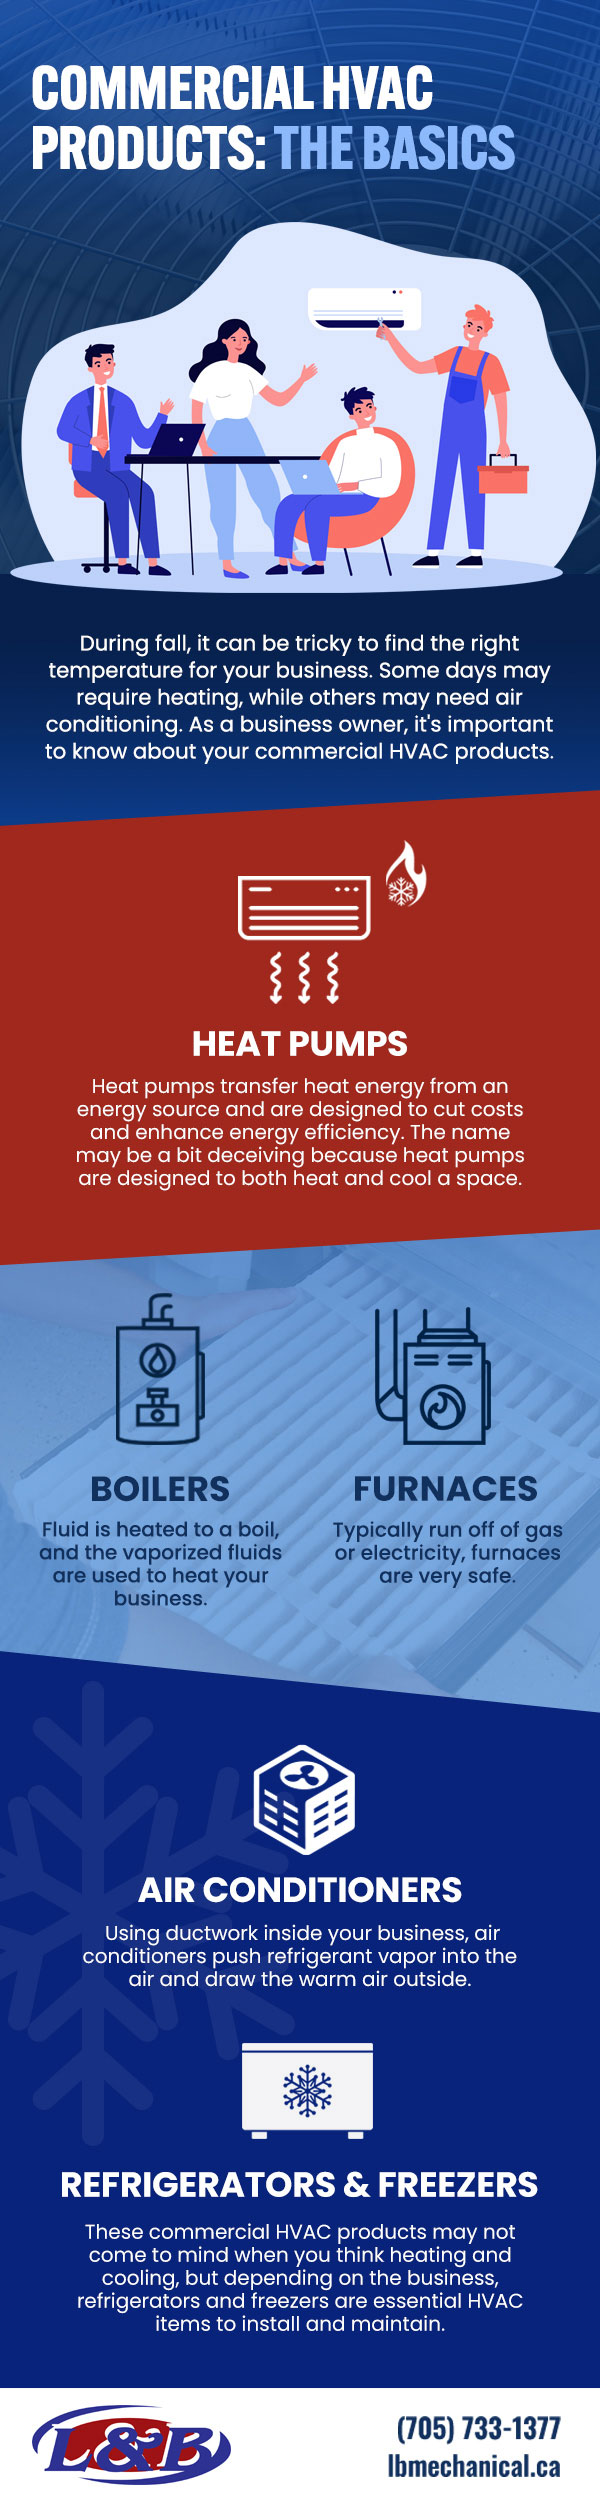 Commercial HVAC Products: The Basics